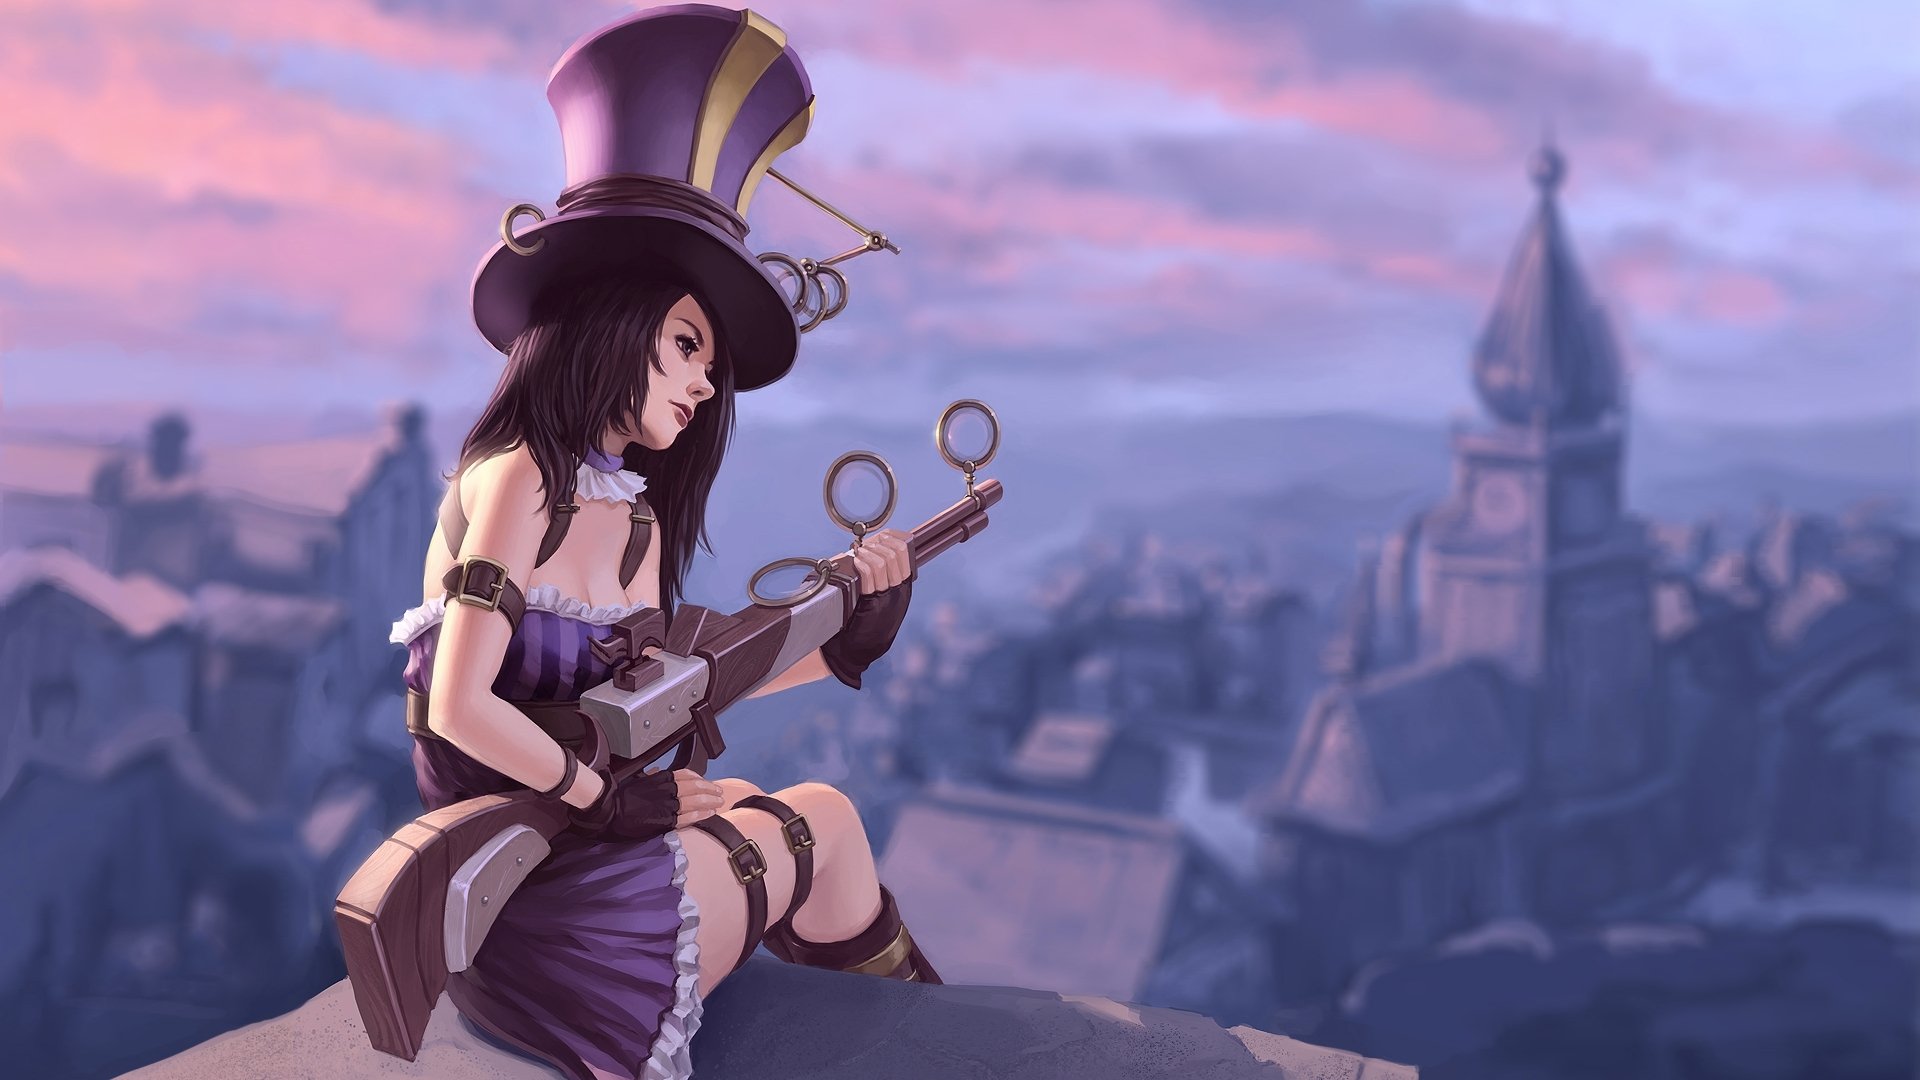 82 Caitlyn League Of Legends Hd Wallpapers Background Images Images, Photos, Reviews